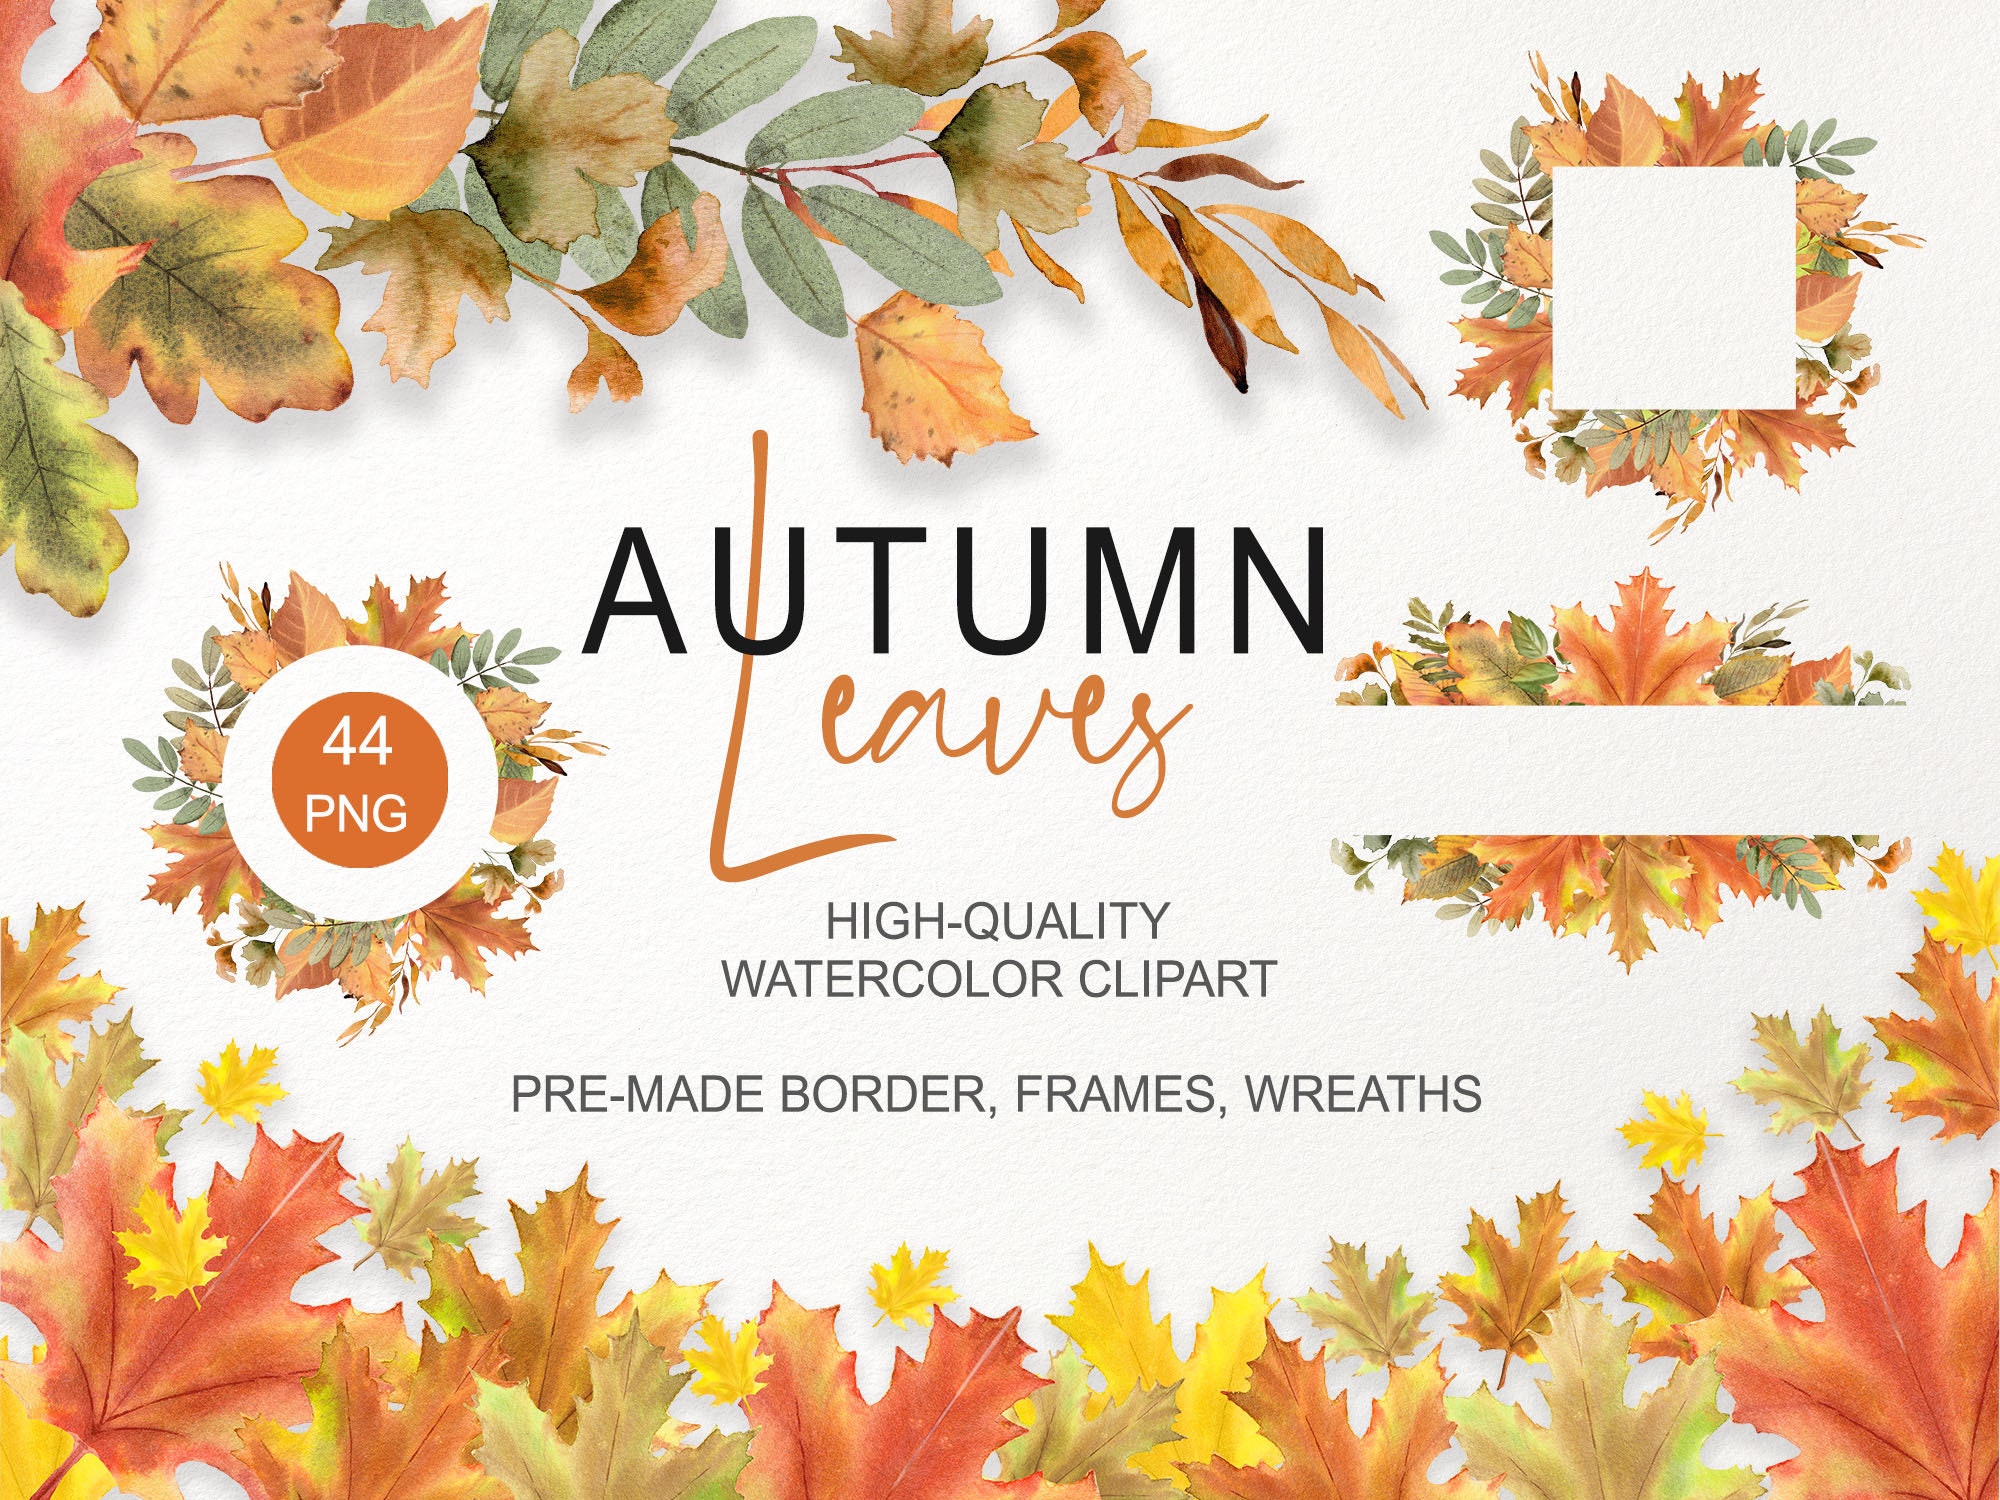 Cute animals in sweaters autumn leaves Royalty Free Vector